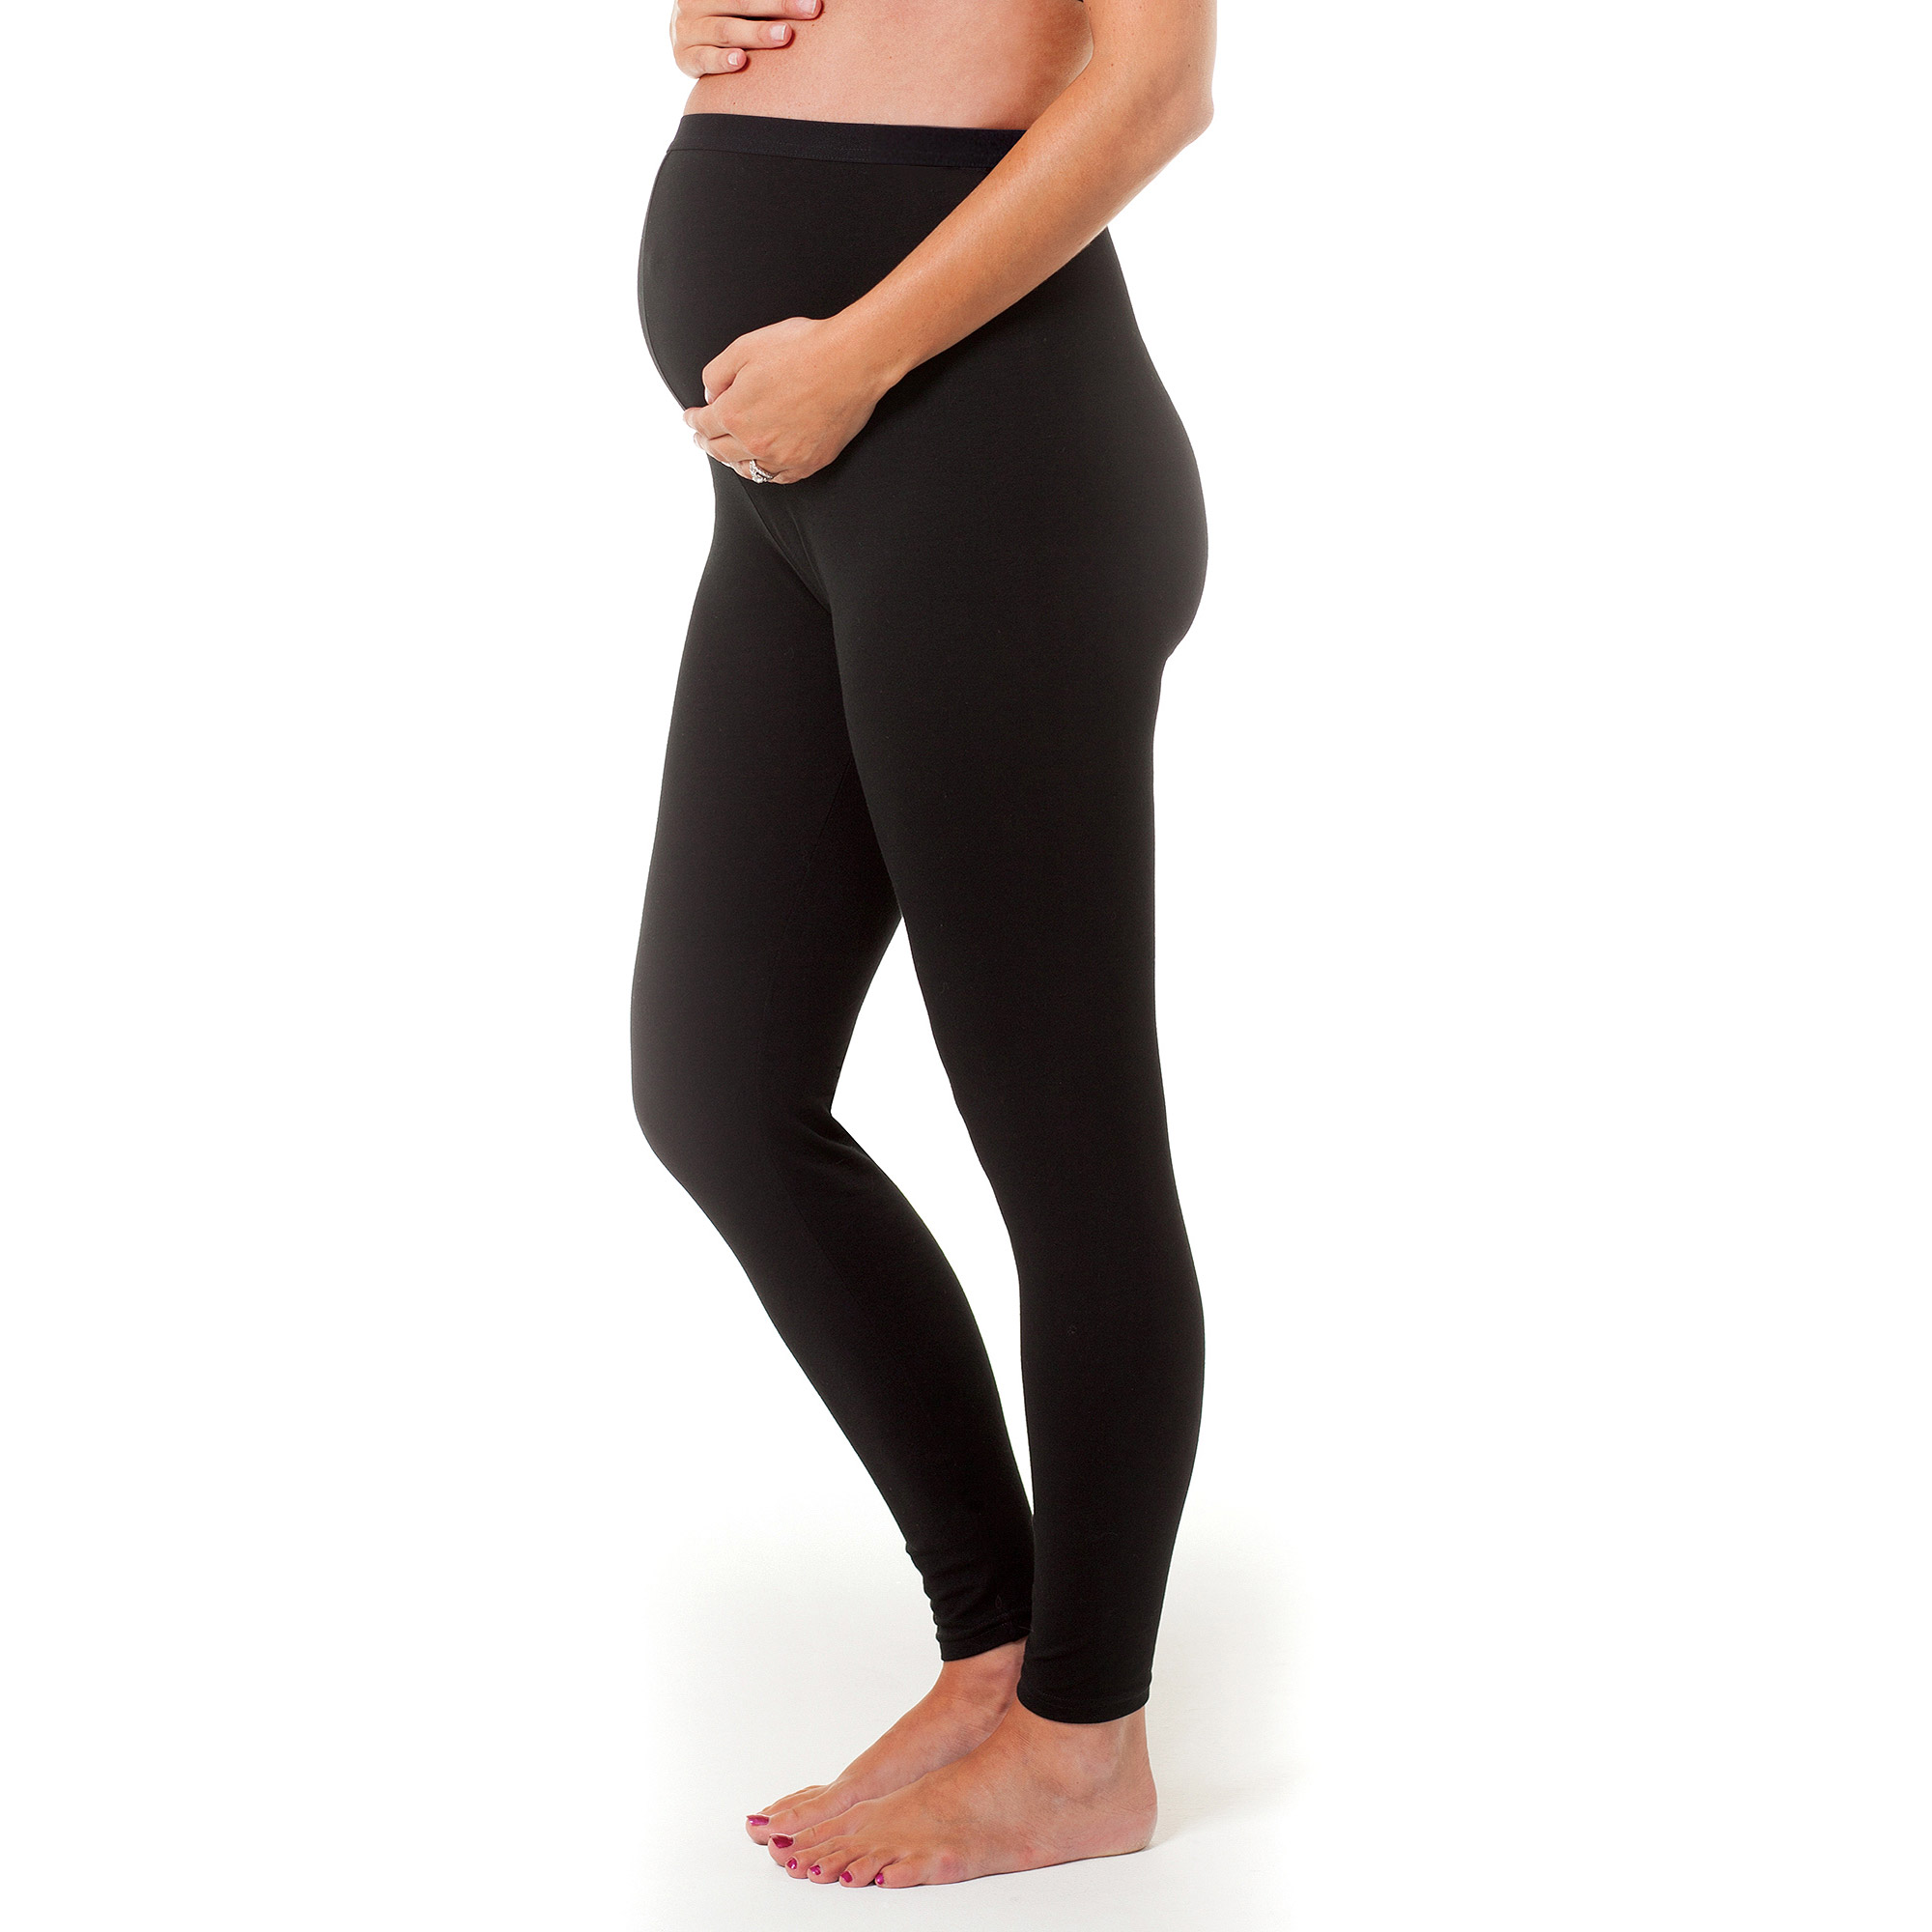 Over-the-Belly Maternity Leggings - image 1 of 1